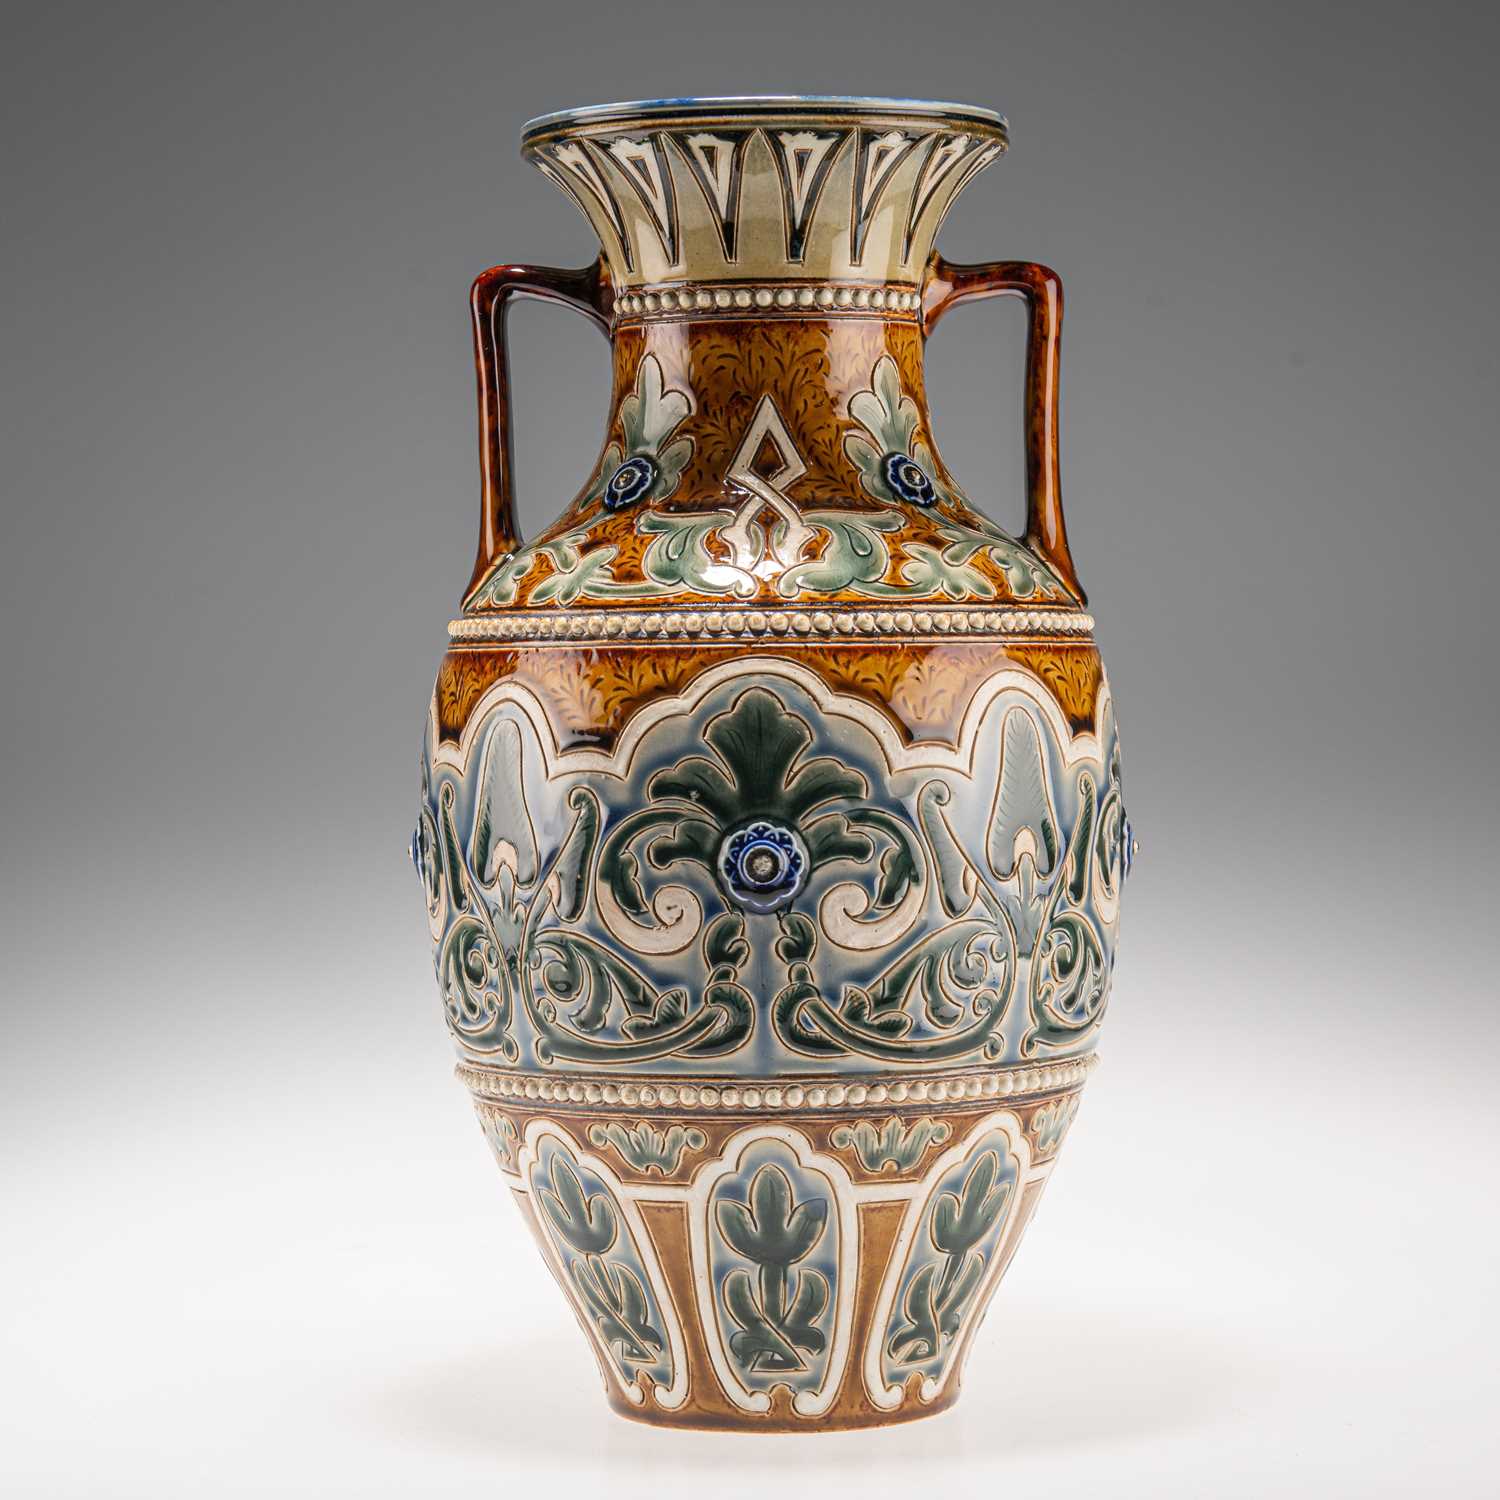 Lot 153 - FRANK A. BUTLER FOR DOULTON LAMBETH, A LATE 19TH CENTURY LARGE STONEWARE AMPHORA VASE